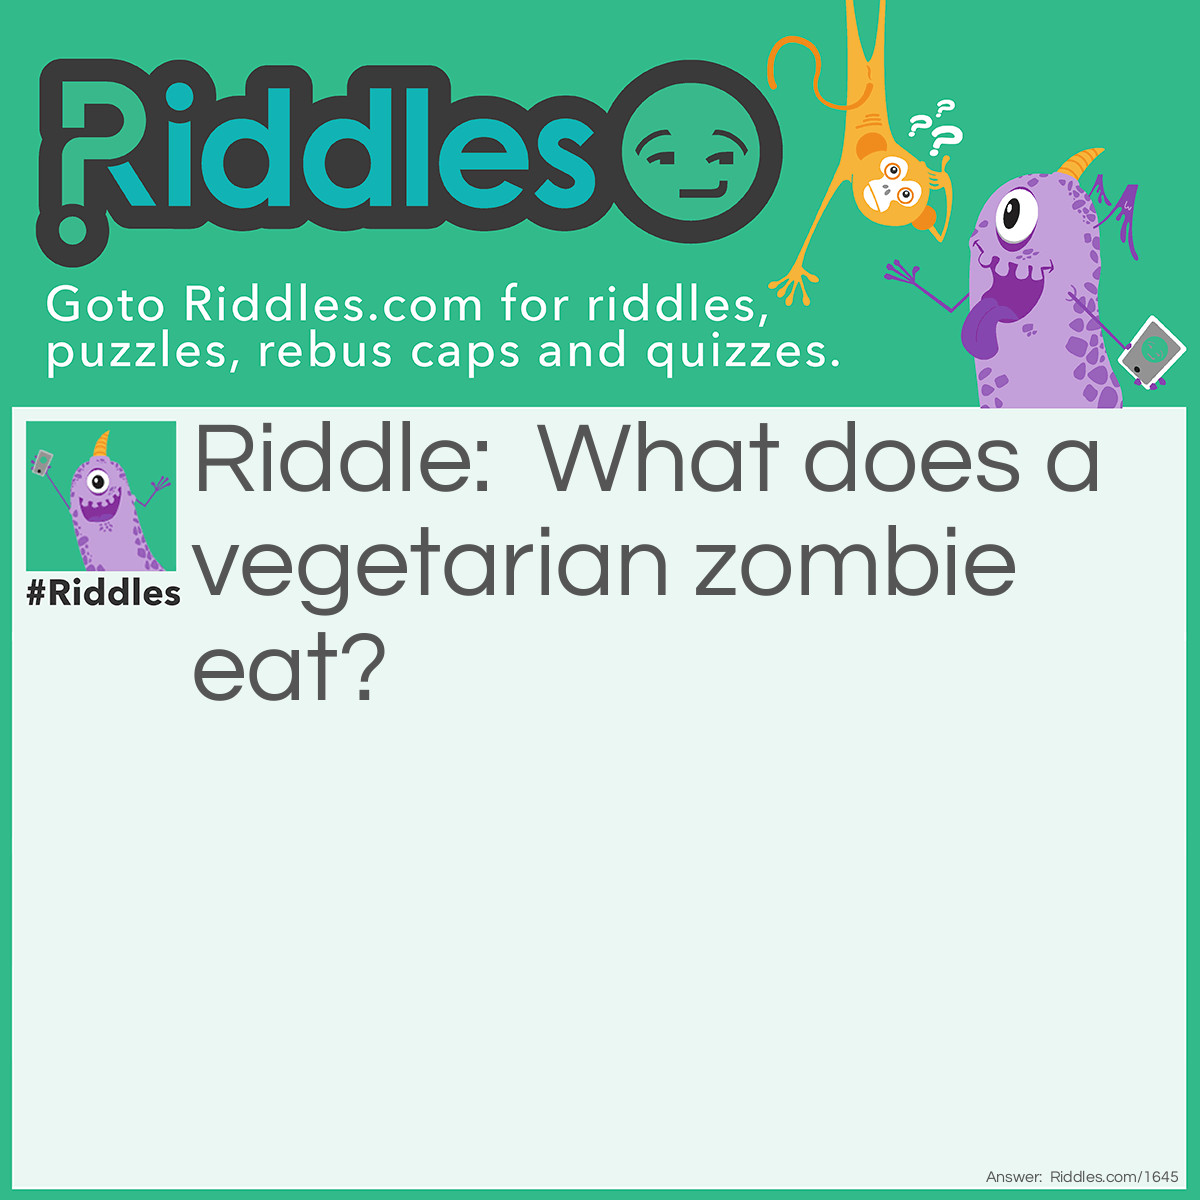 Riddle: What does a vegetarian zombie eat? Answer: Graaaaaaaains!